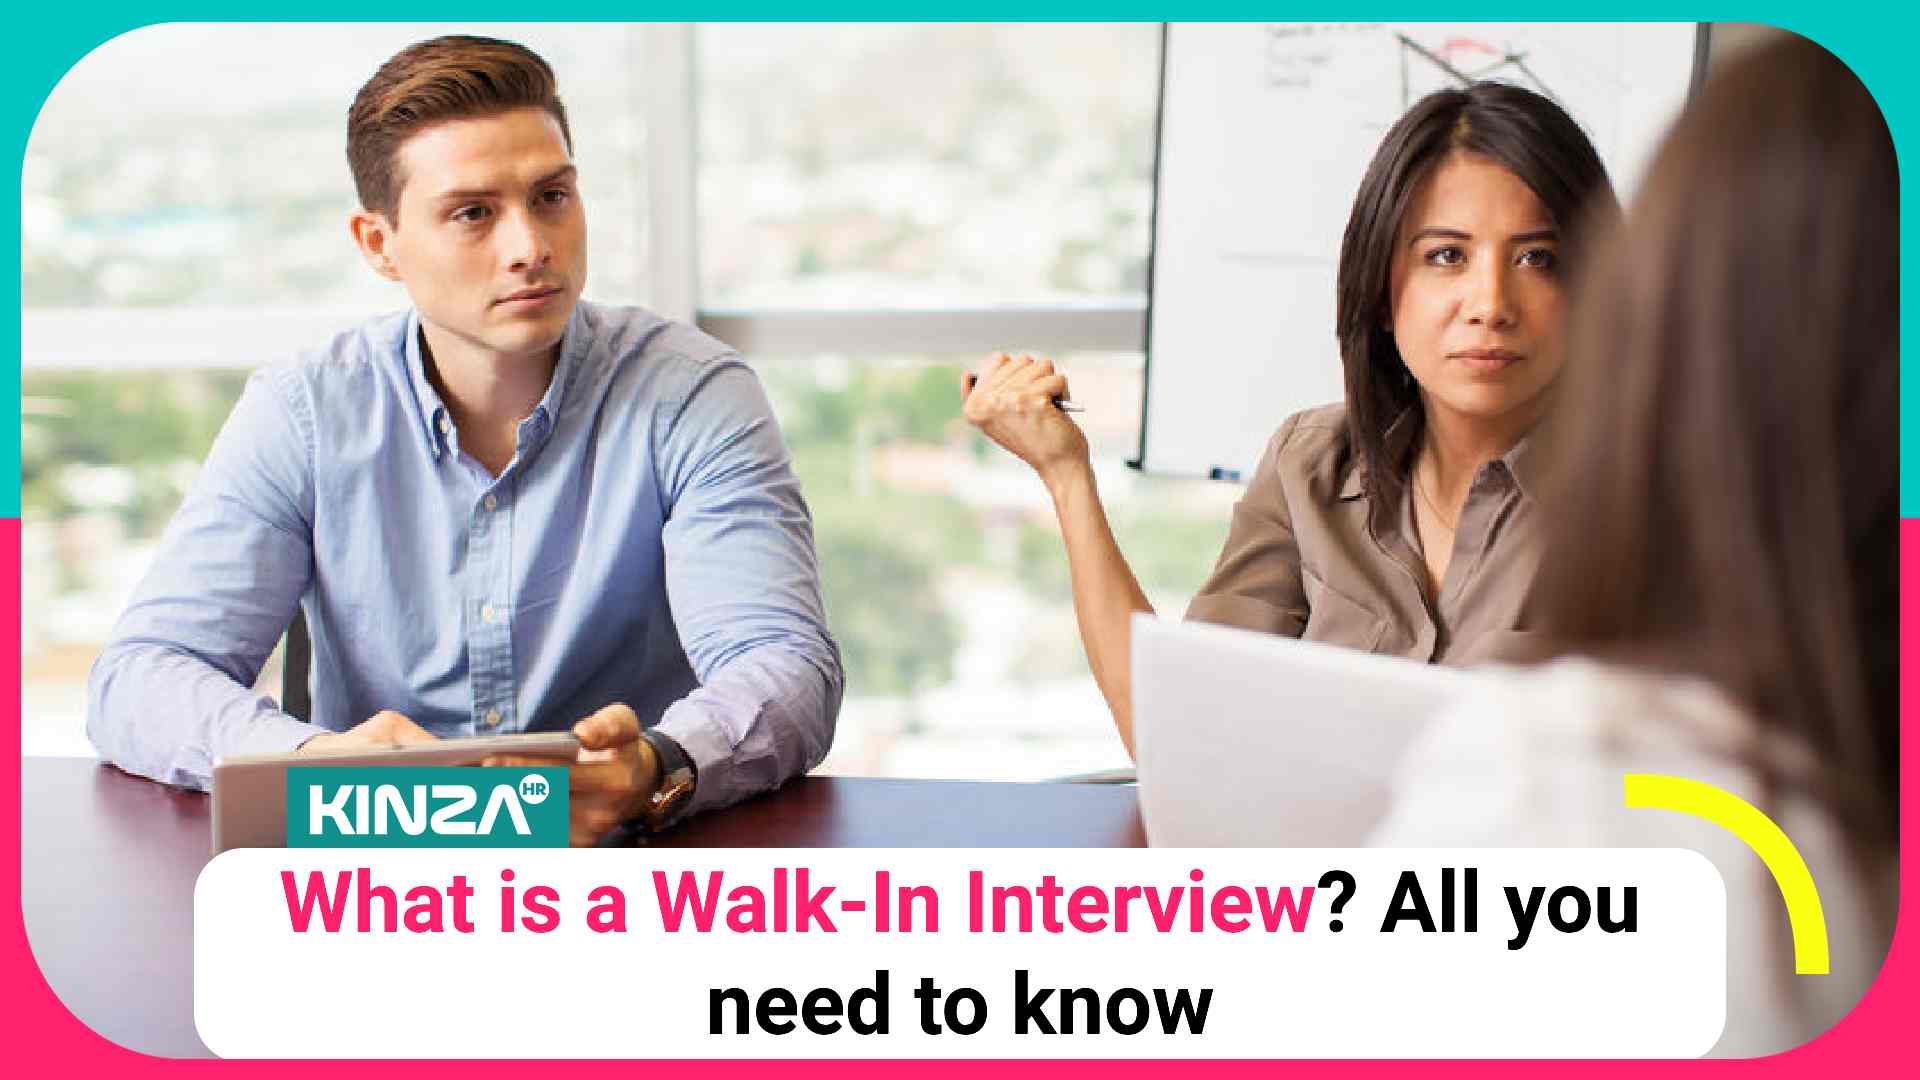 What is a Walk-In Interview? All you need to know